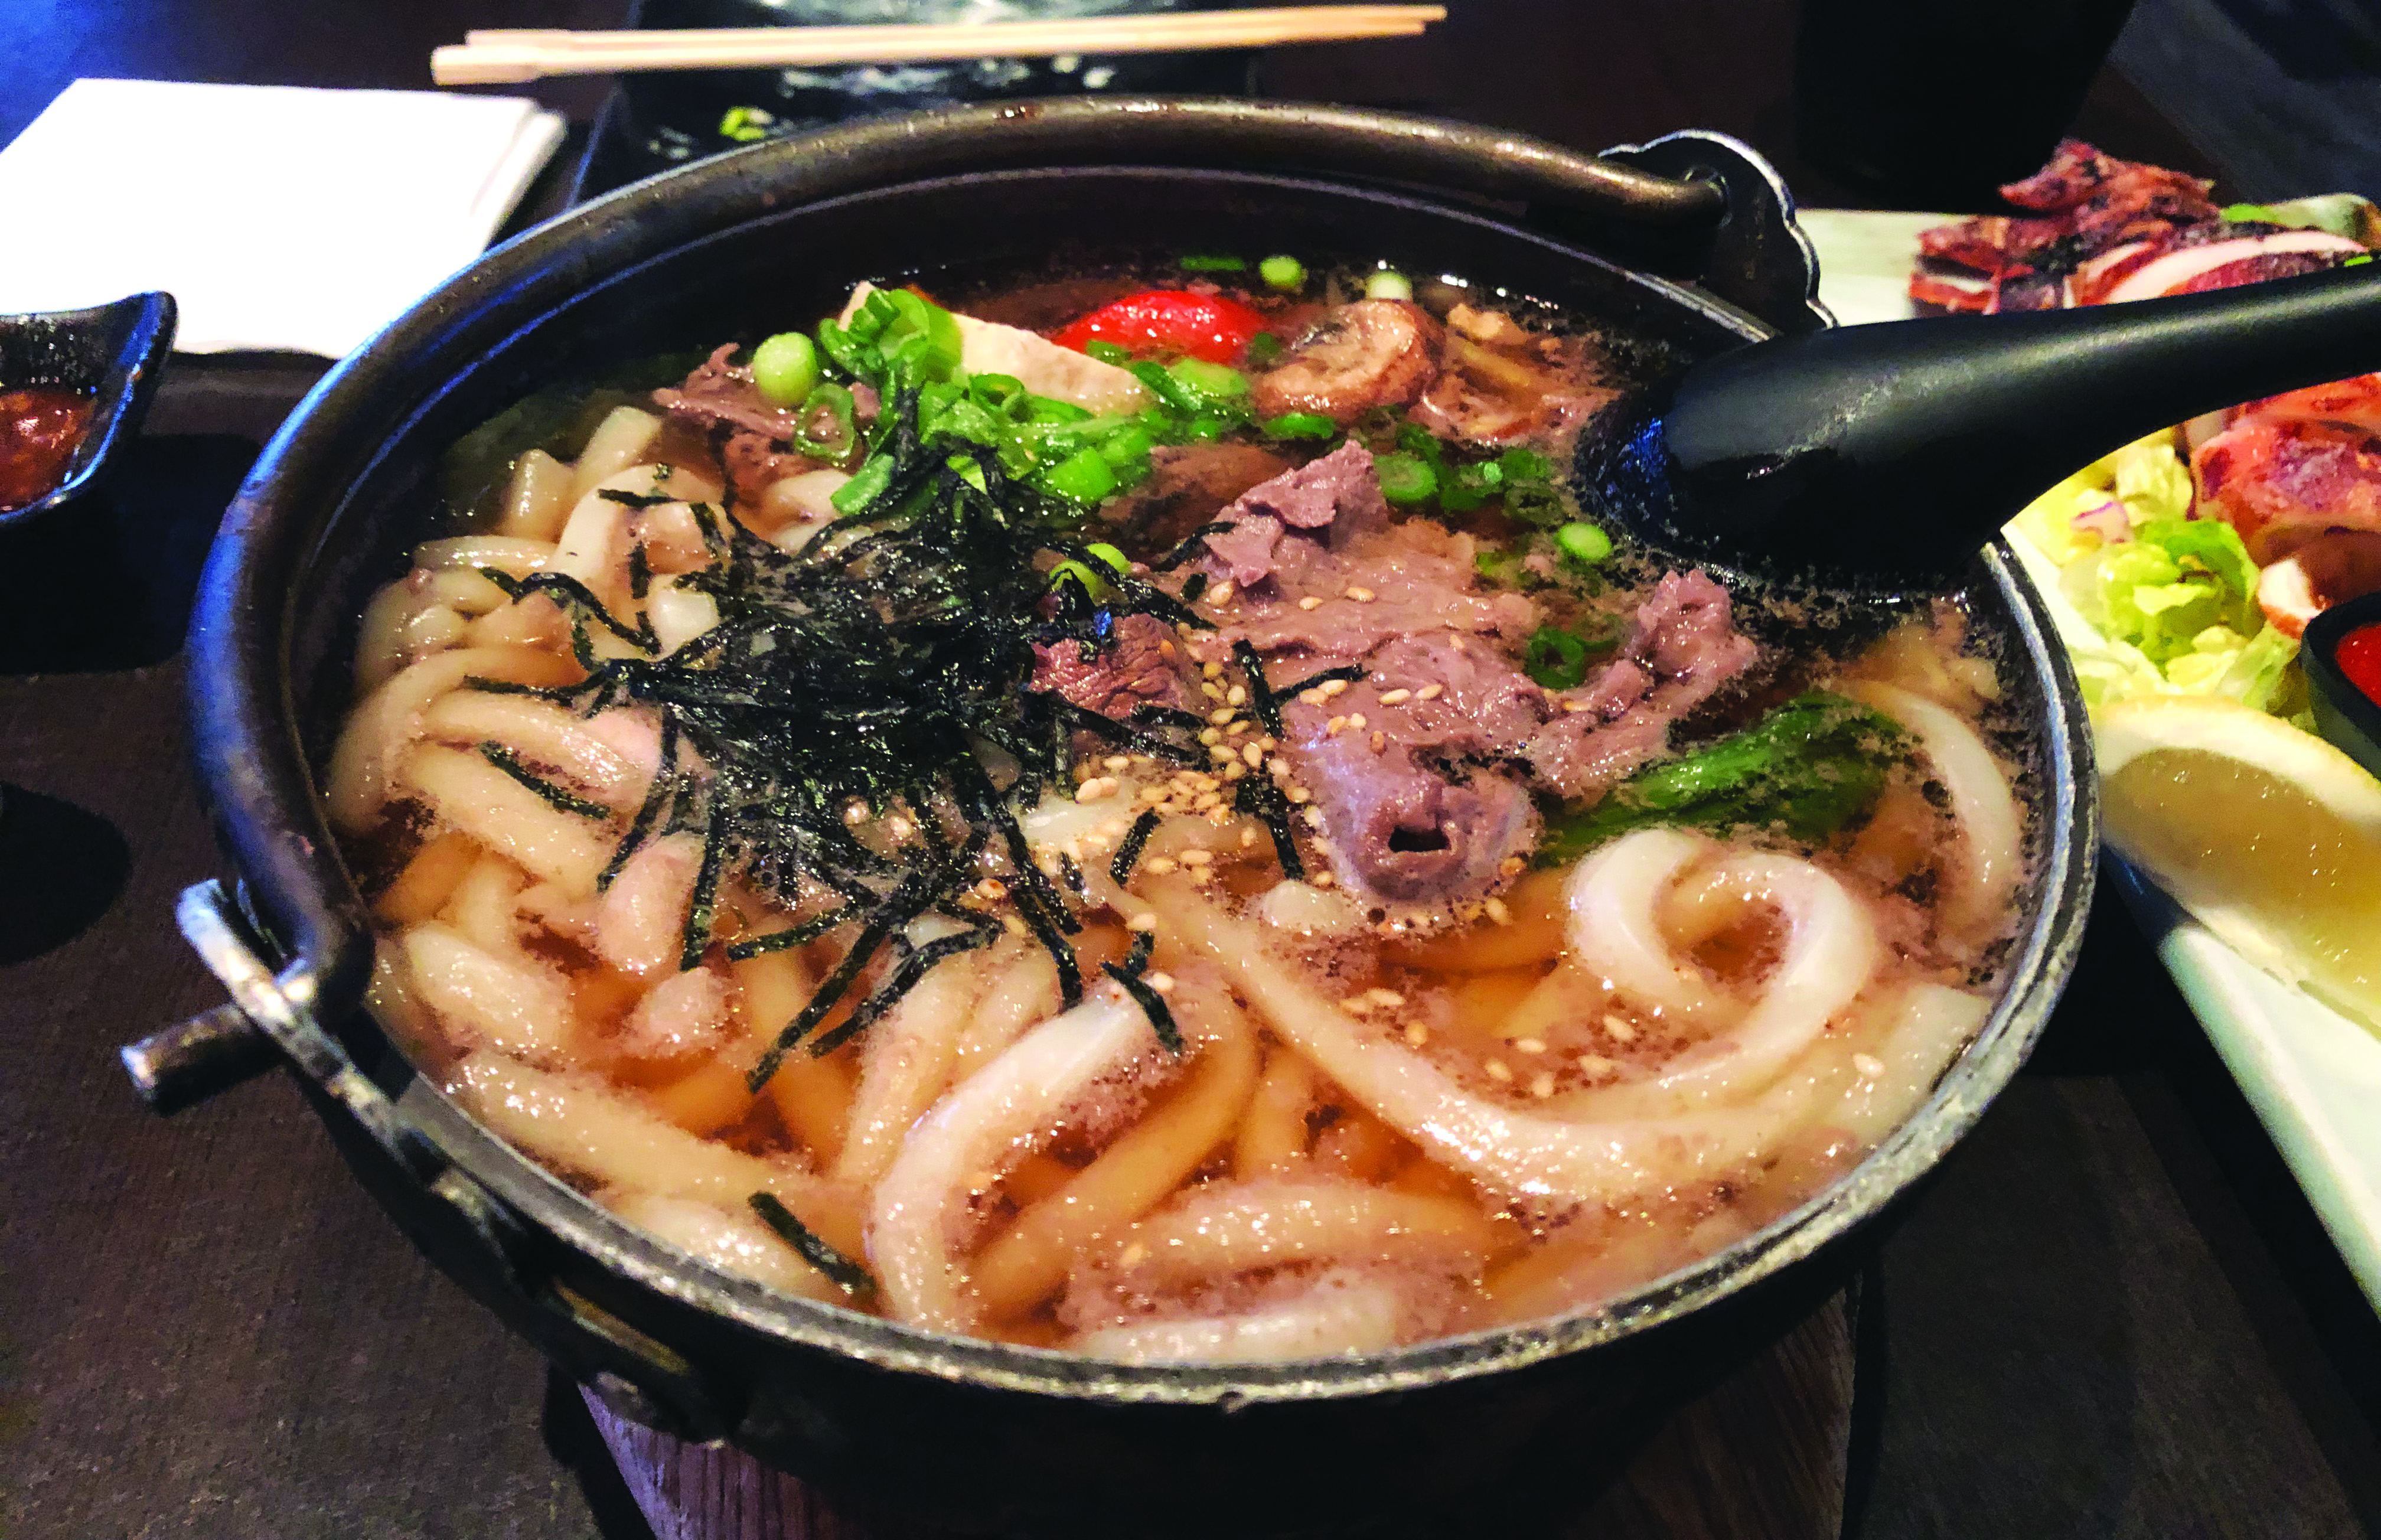 Kobe’s beef udon had a few untraditional ingredients.